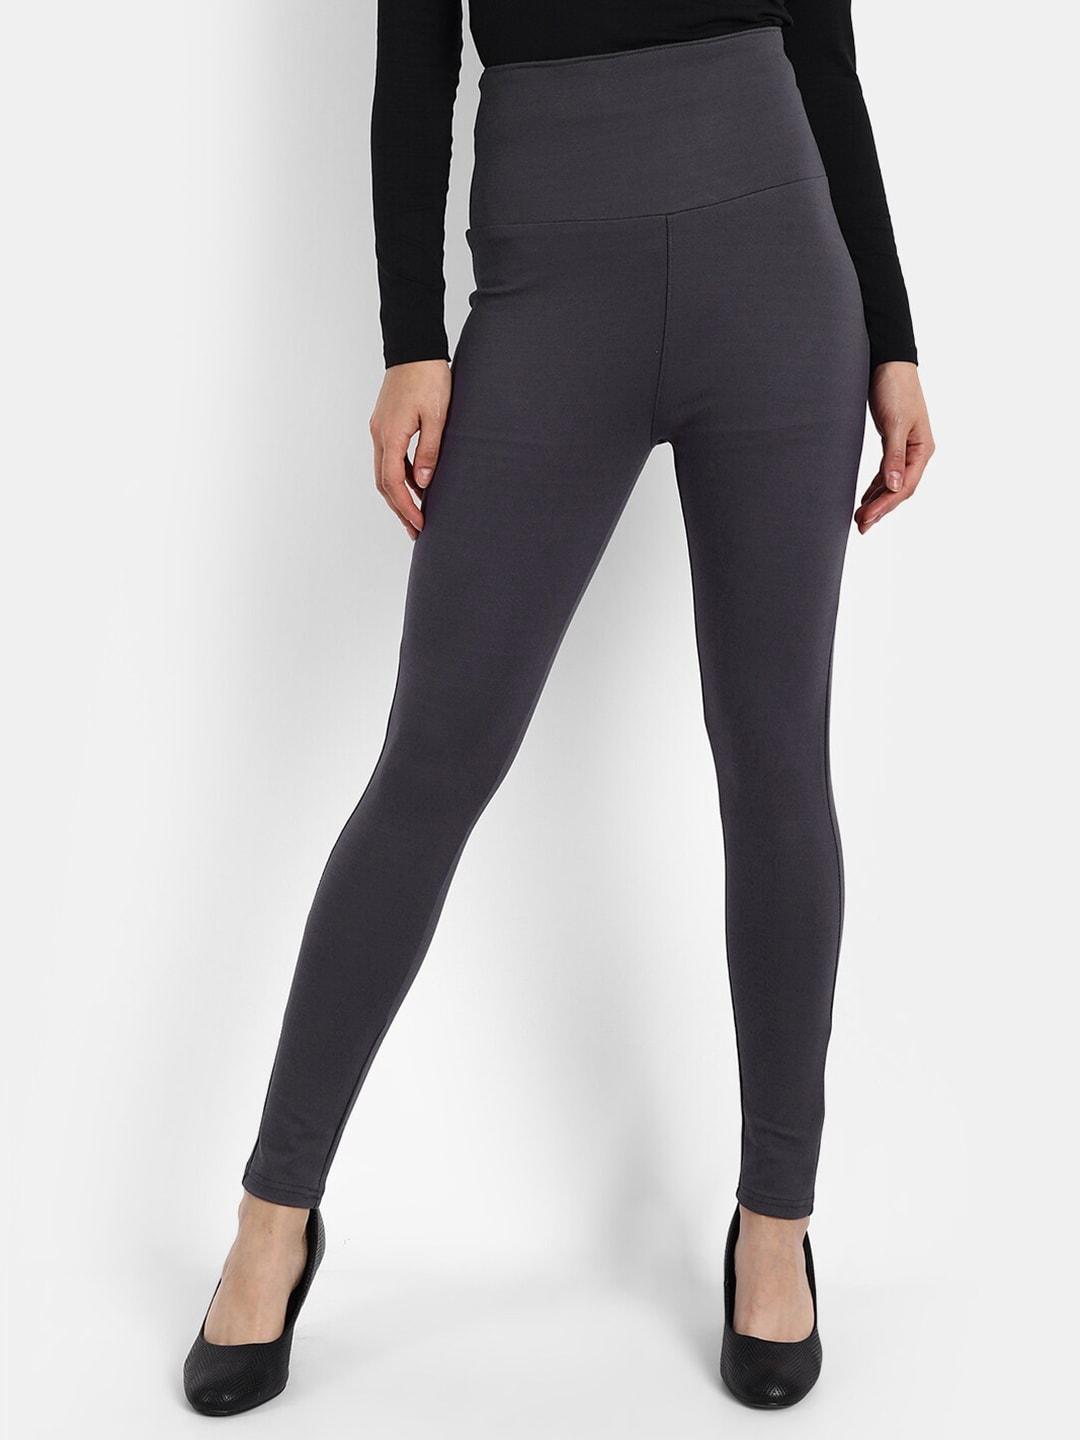 next-one-women-grey-solid-skinny-fit-jeggings